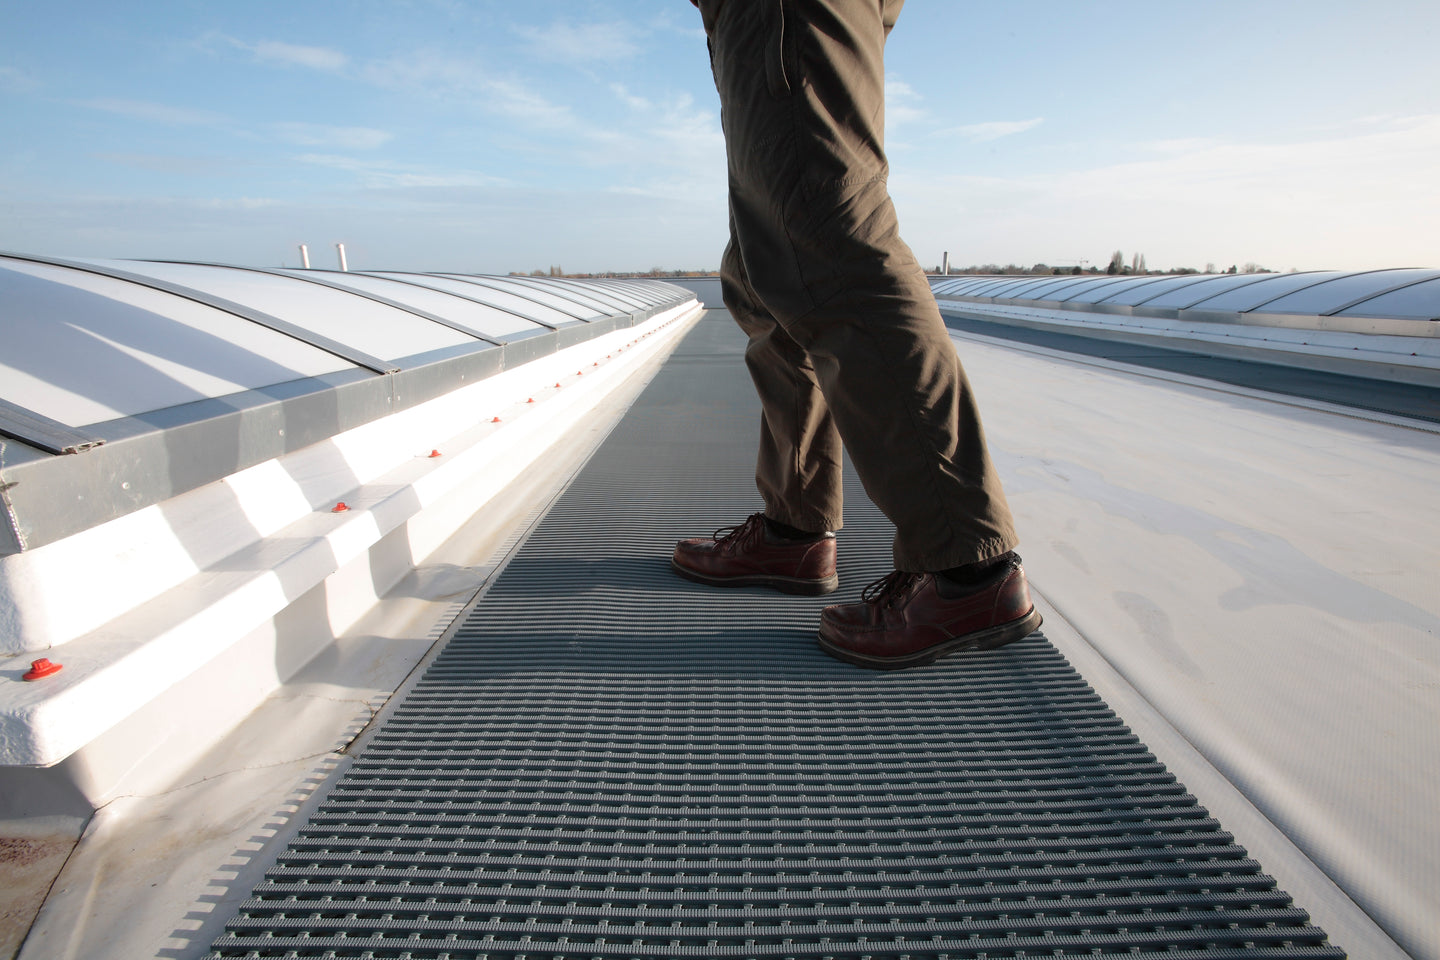 Our roof matting protects the membrane and creates safe access for workers